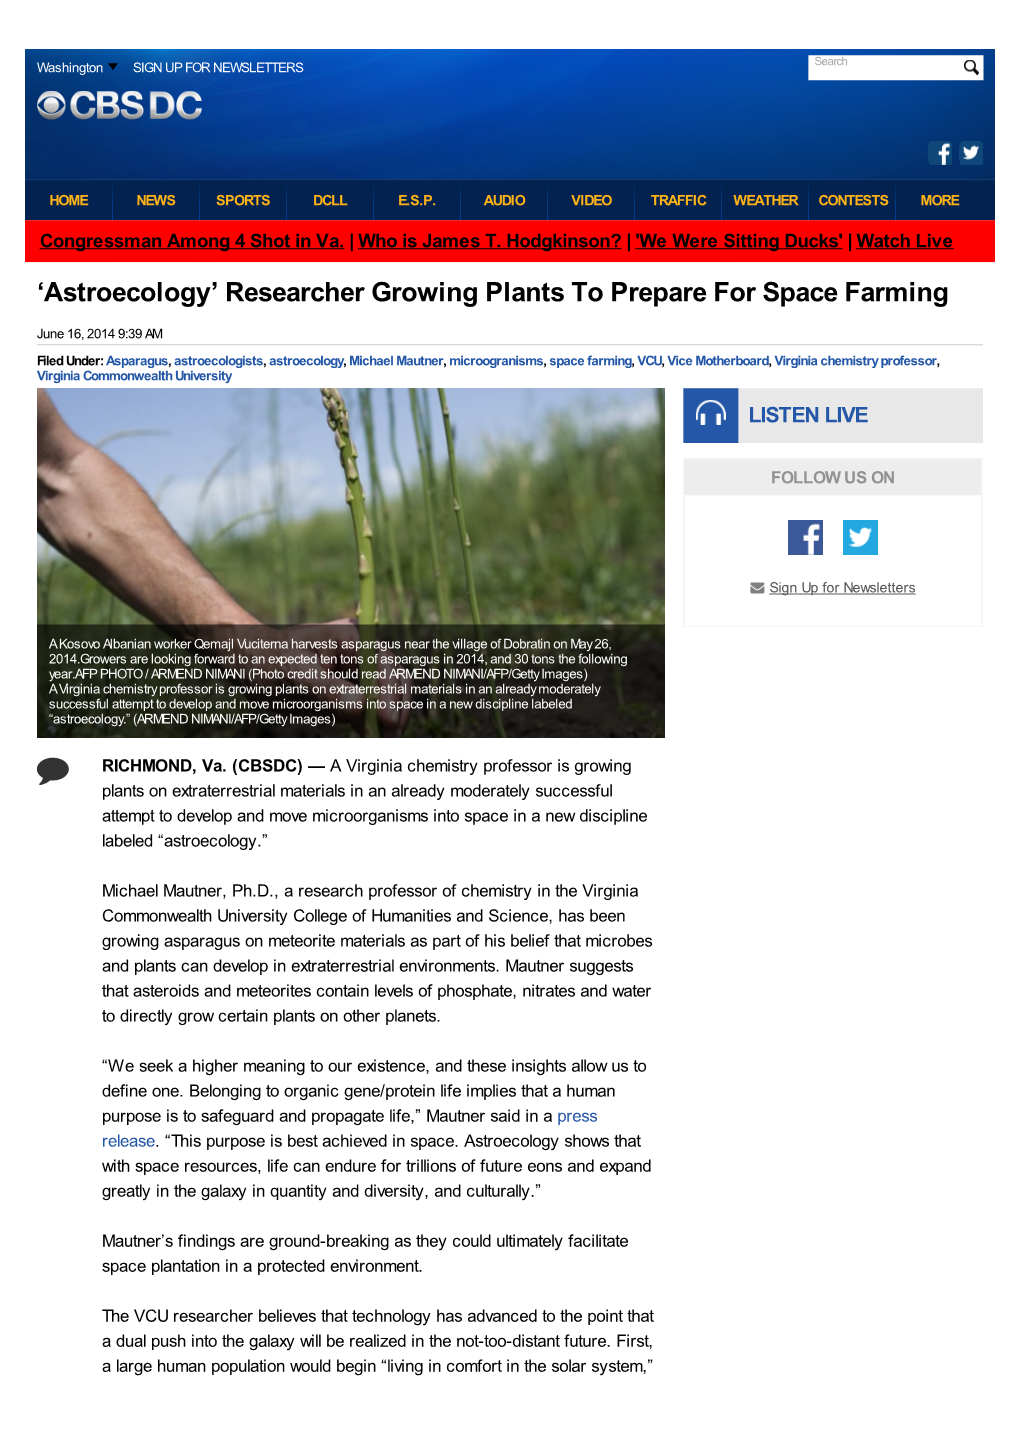 'Astroecology' Researcher Growing Plants To